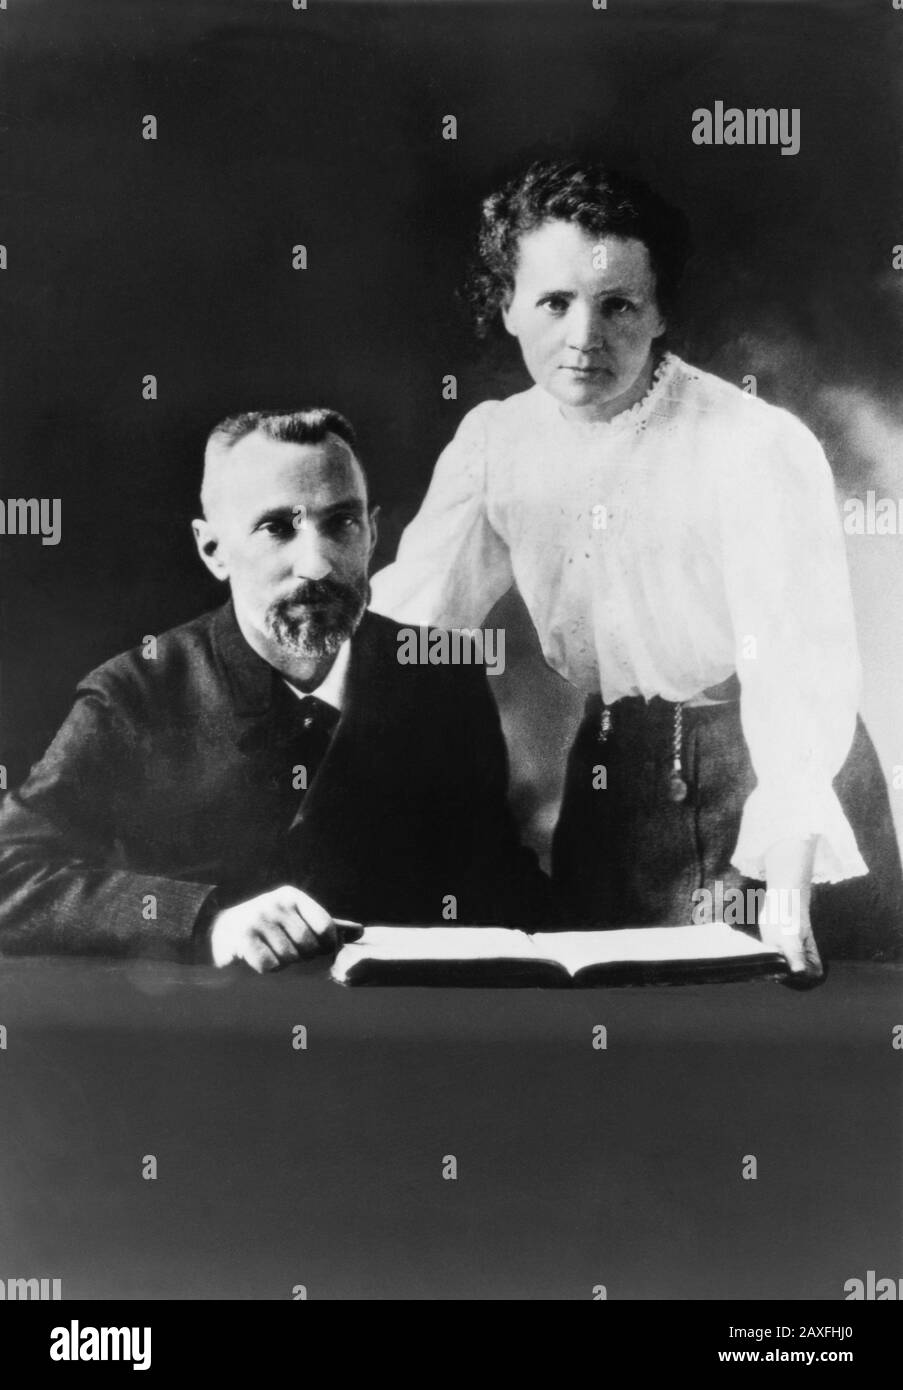 1899 ca , Paris , France : The celebrated physicist and chemist polish-born  MARIE  CURIE ( born Maria Sklodowska , 1867 - 1934 ), with housband , the physicist  PIERRE CURIE ( 1859 – 1906 ), a pioneer in crystallography, magnetism, piezoelectricity and radioactivity . He shared the 1903 Nobel Prize in physics with his wife Marie Curie , and Henri Becquerel, ' in recognition of the extraordinary services they have rendered by their joint researches on the radiation phenomena discovered by Professor Henri Becquerel '  - foto storiche - foto storica  - scienziato - scientist  - portrait - ritrat Stock Photo